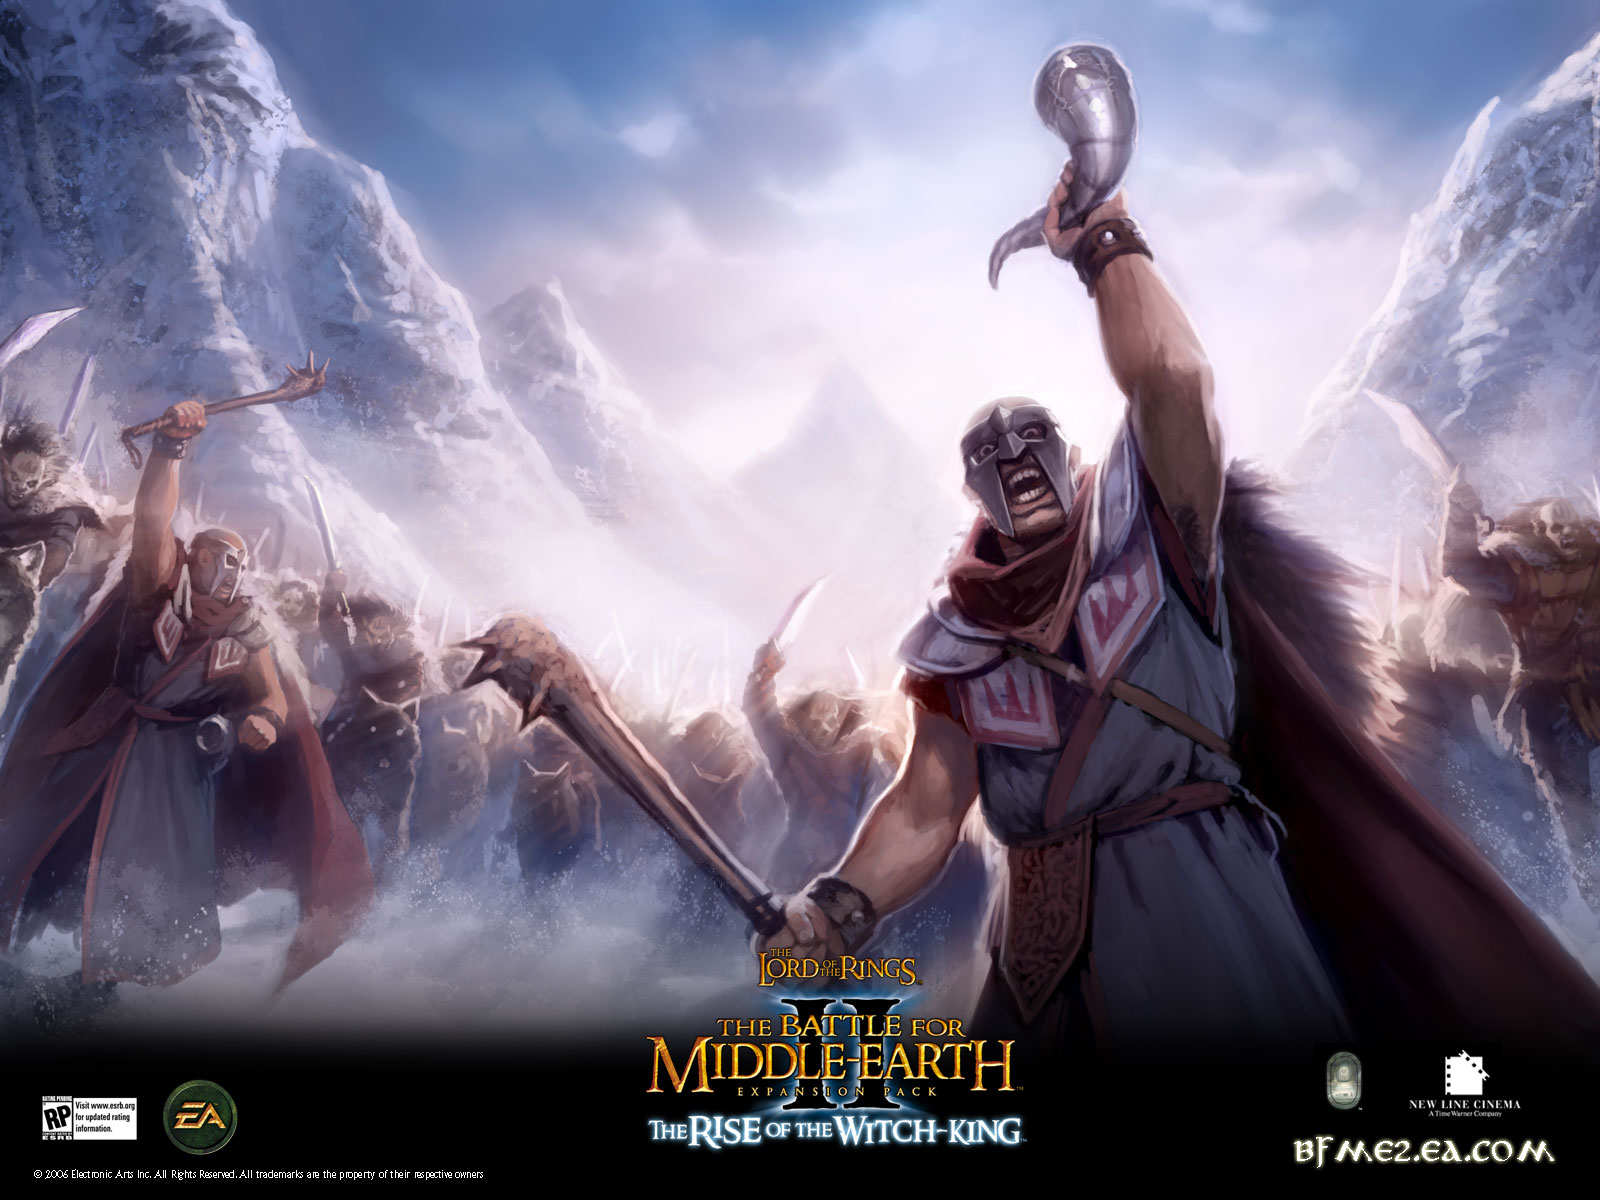 Download game lord of the rings the battle for middle earth ii free